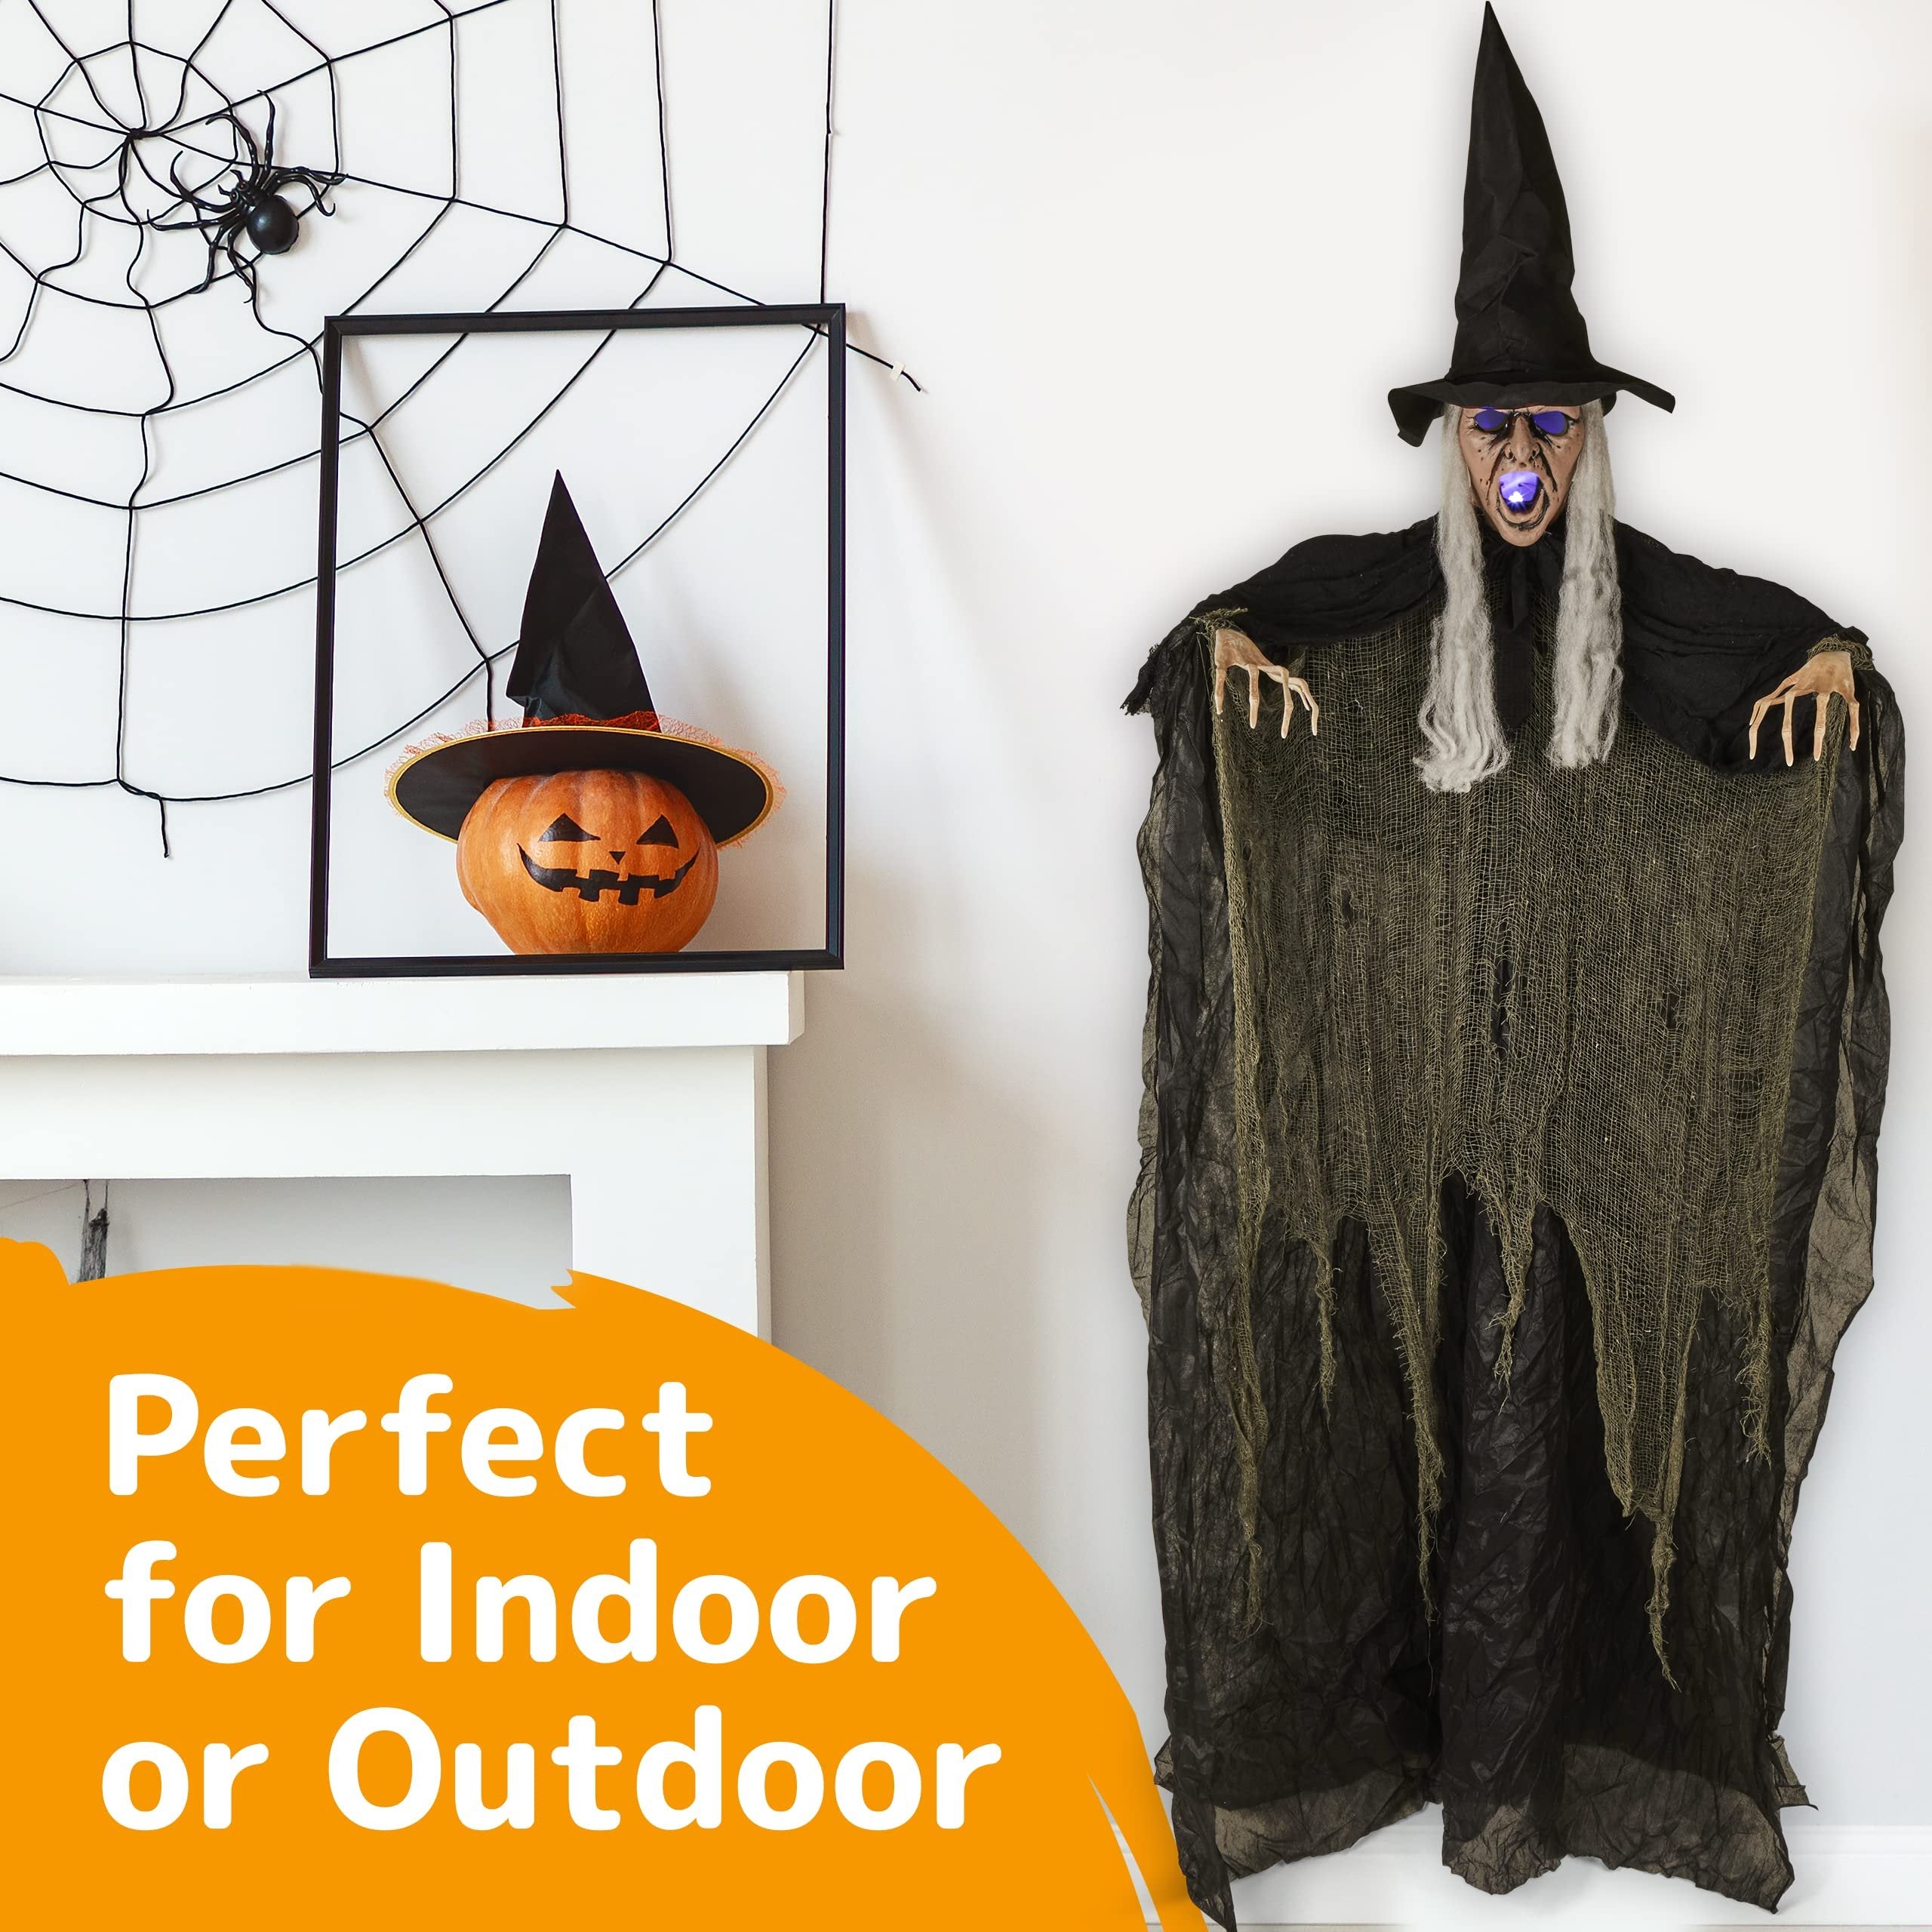 6 Feet Tall Witch - Scary Halloween Décor with Glowing LED Eyes & Mouth - Spooky Witch Scary Halloween Decorations Outdoor and Indoor